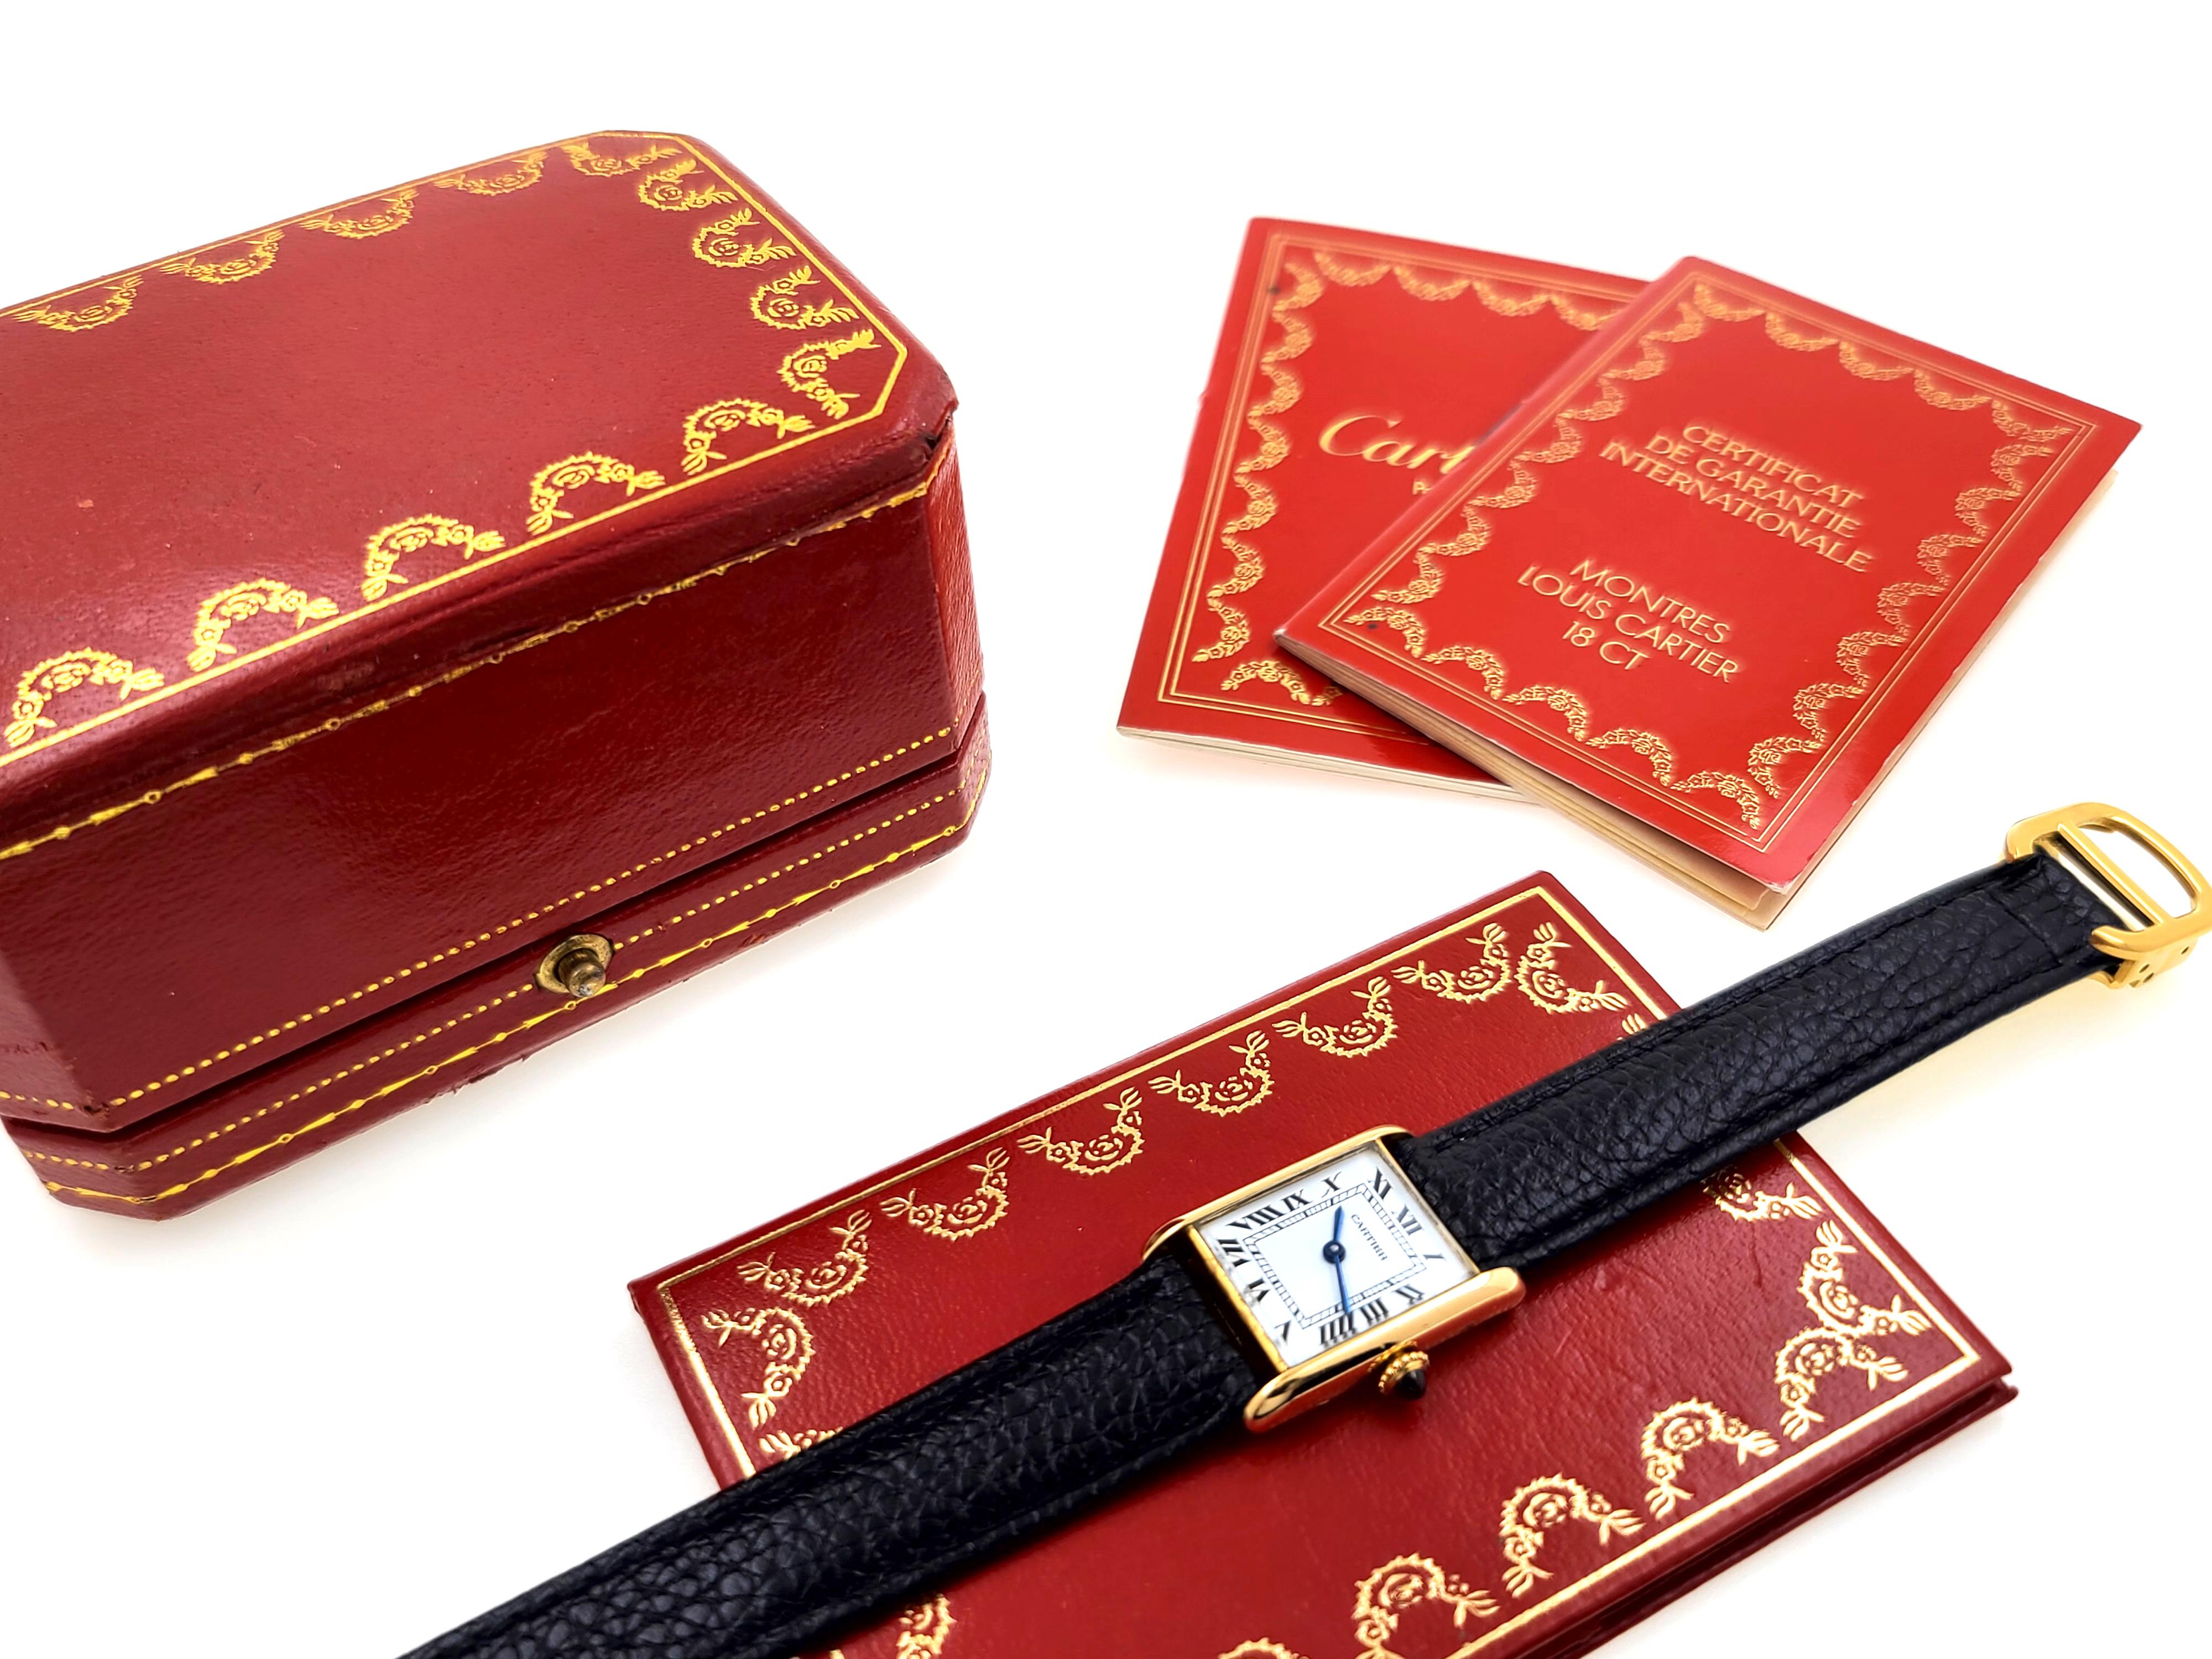 Cartier Tank Louis 67117 18k Gold 1977 Full Set Box and Papers 78087 7